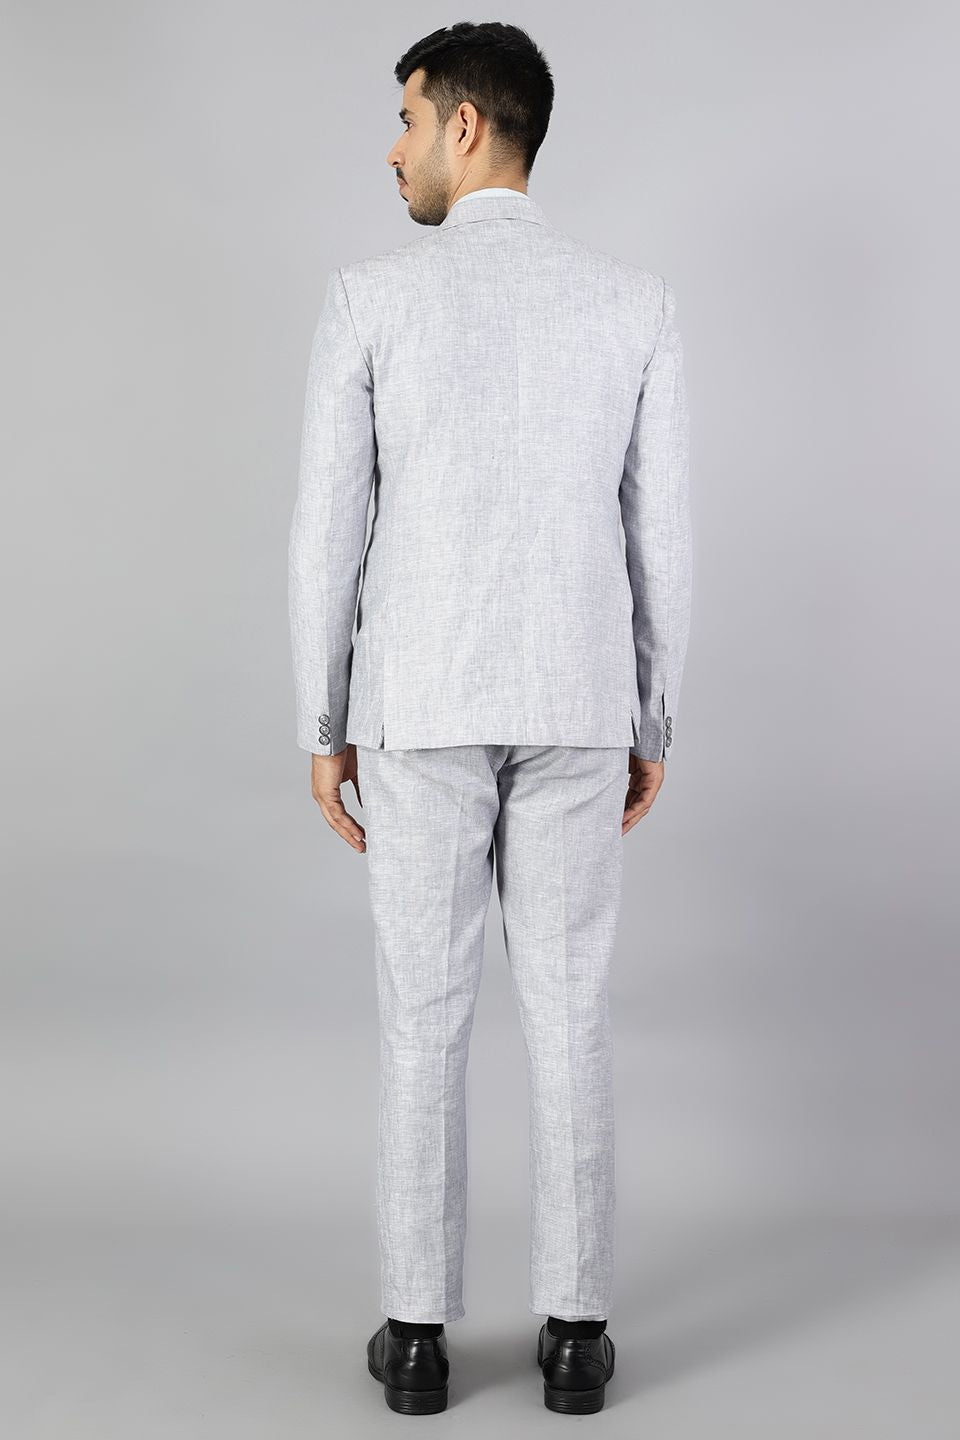 Business Suits in Silver by HUGO BOSS |